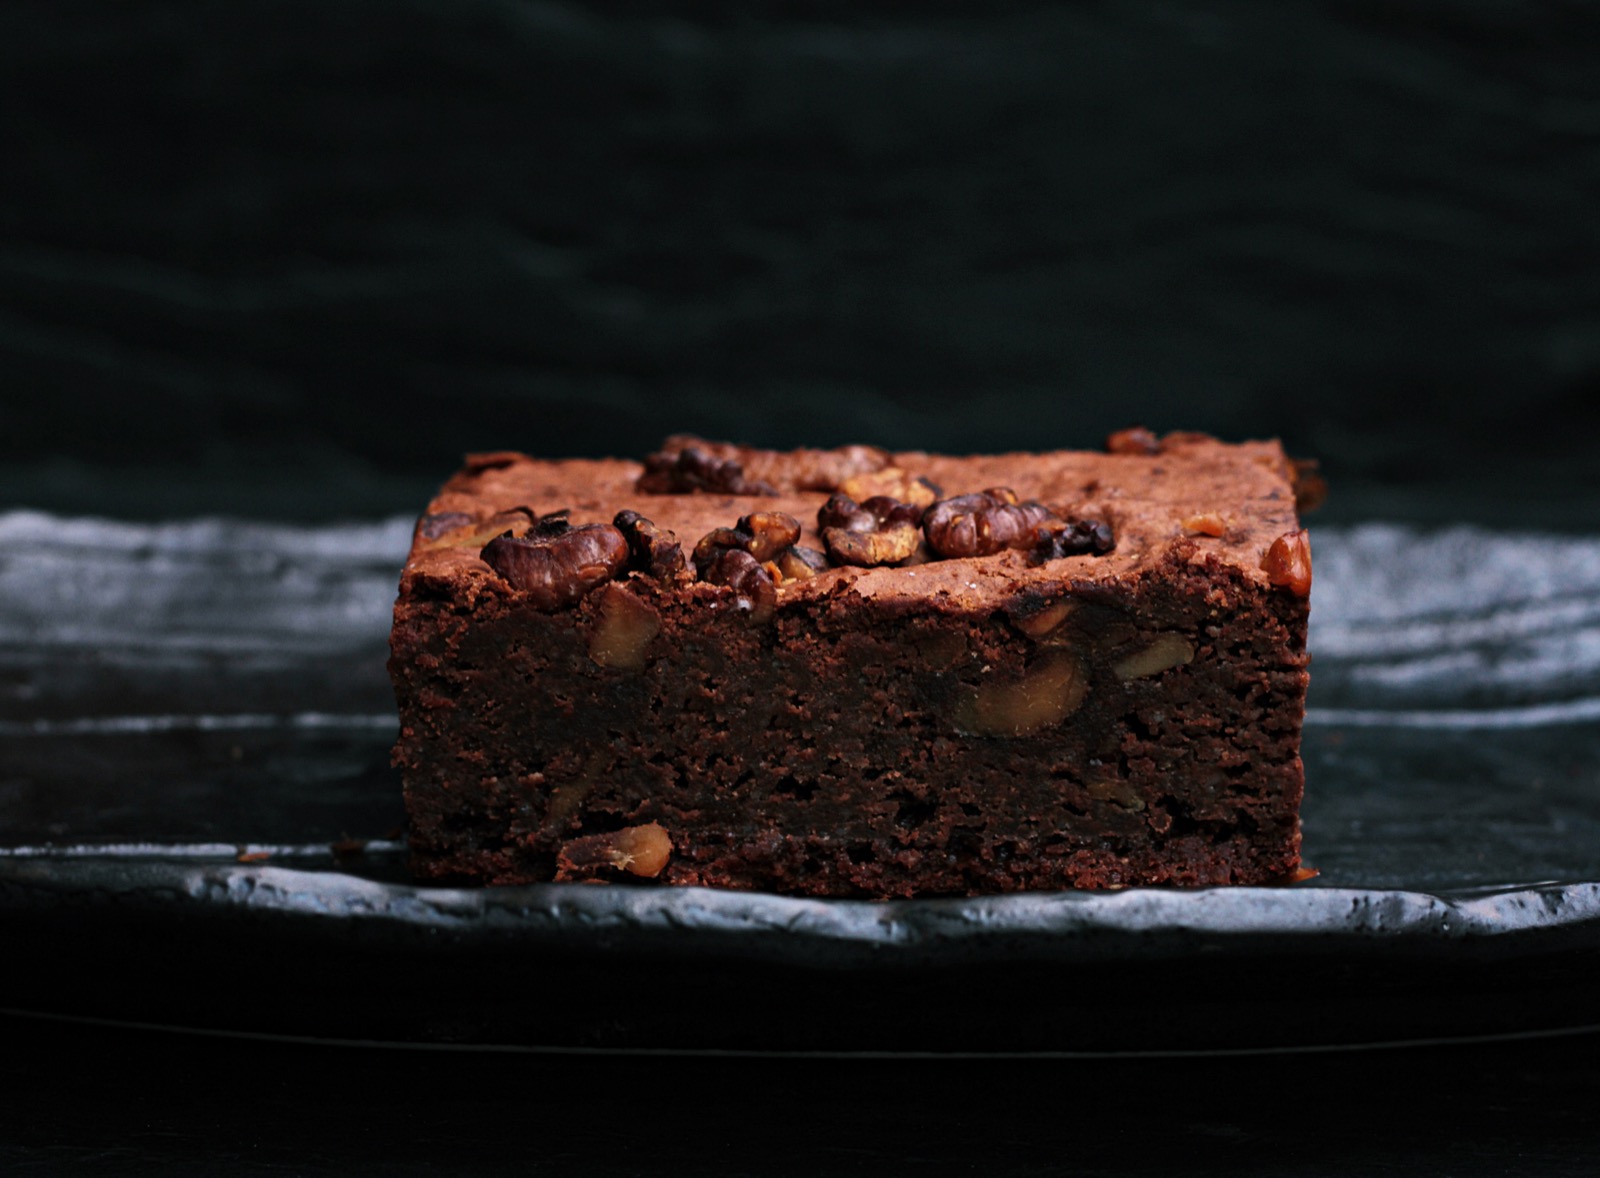 Chocolate brownies and other treats